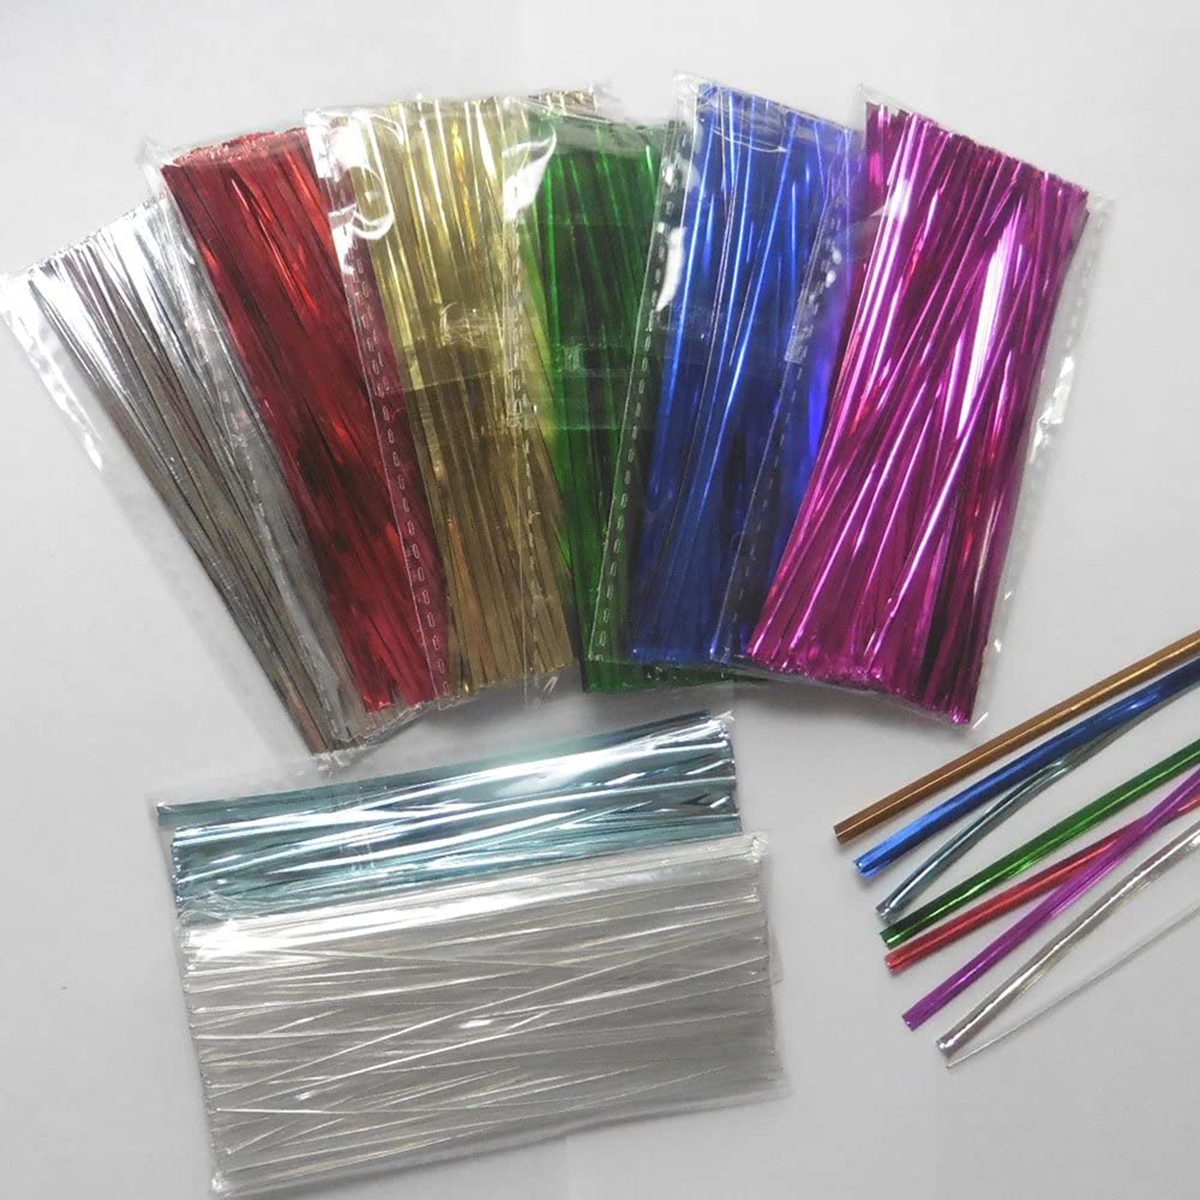 Weststone Brand - 800pcs 4" Metallic Twist Ties, red, blue, green, gold, silver, clear and pink